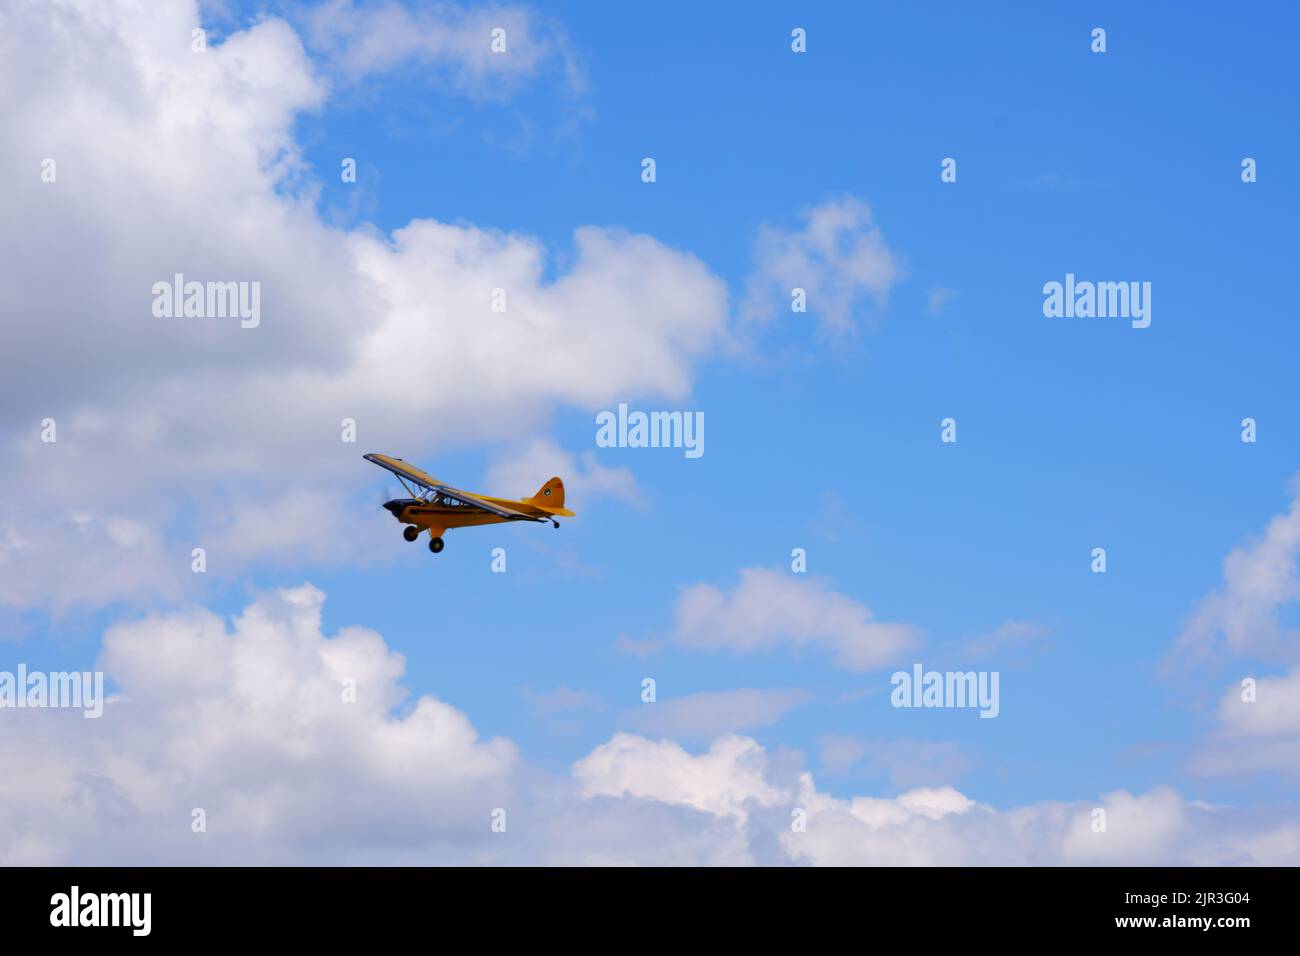 Single engine yellow propeller air plane flying at cloudy blue sky in a summer day Stock Photo